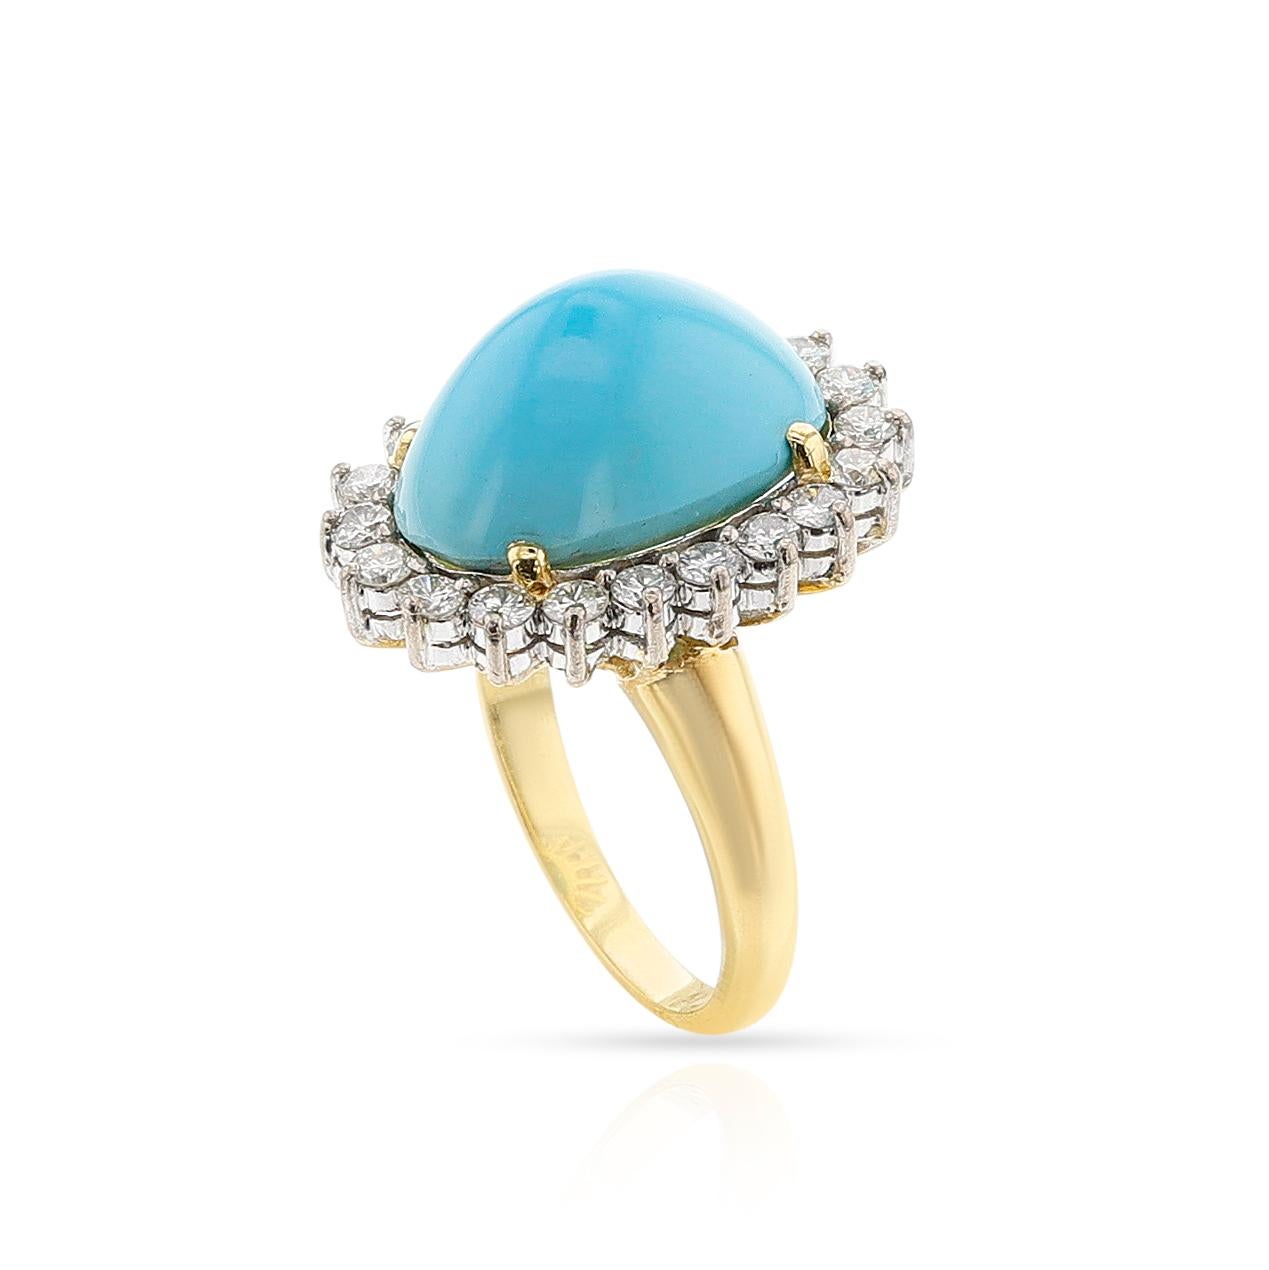 Oval Turquoise Cabochon and Diamond Ring, 18k In Excellent Condition For Sale In New York, NY